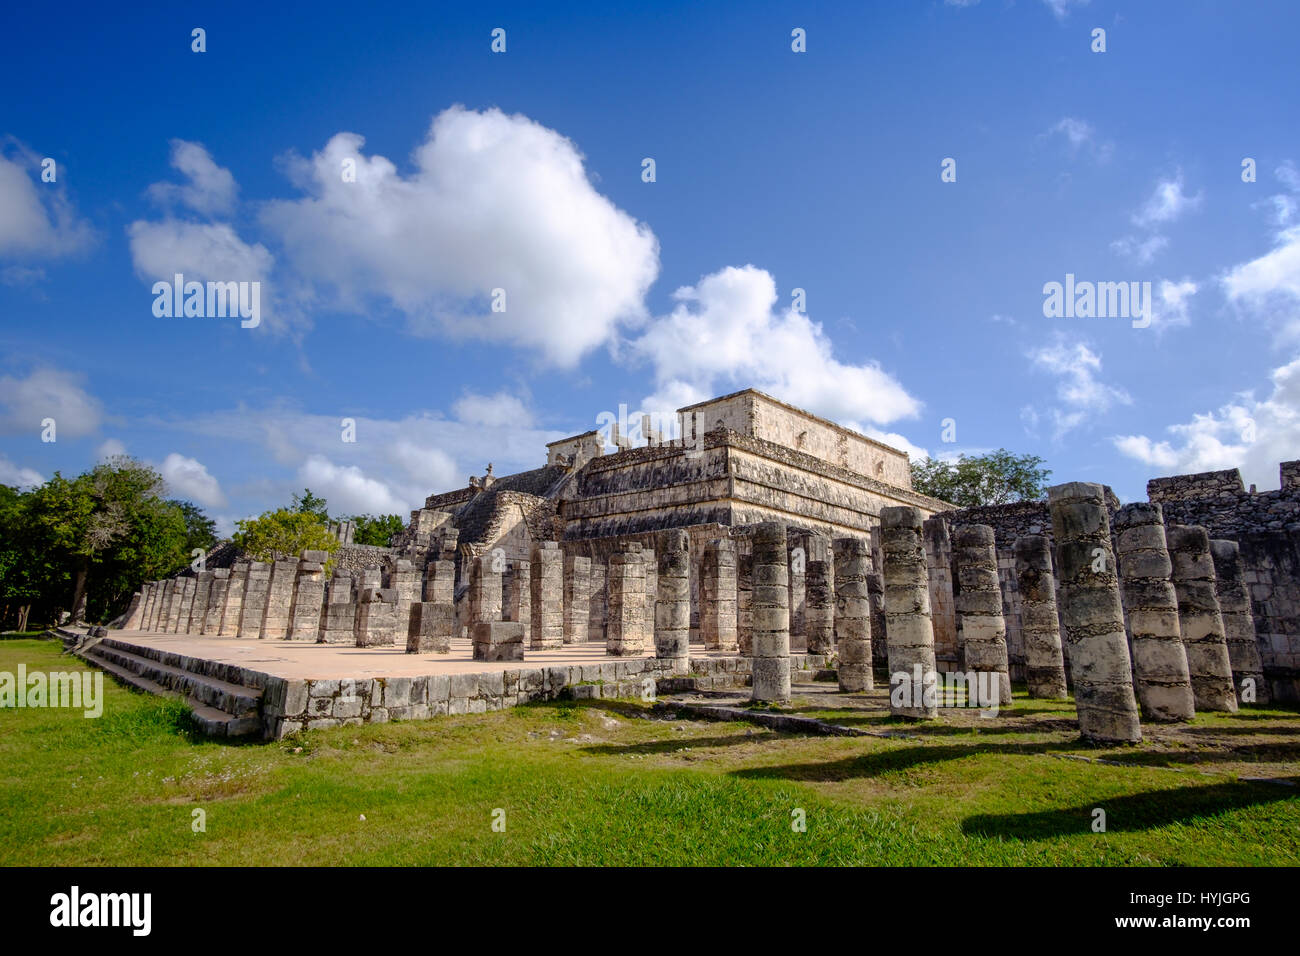 Stone columns and pilars in famous archeological site Chichen Itza, Mexico Stock Photo